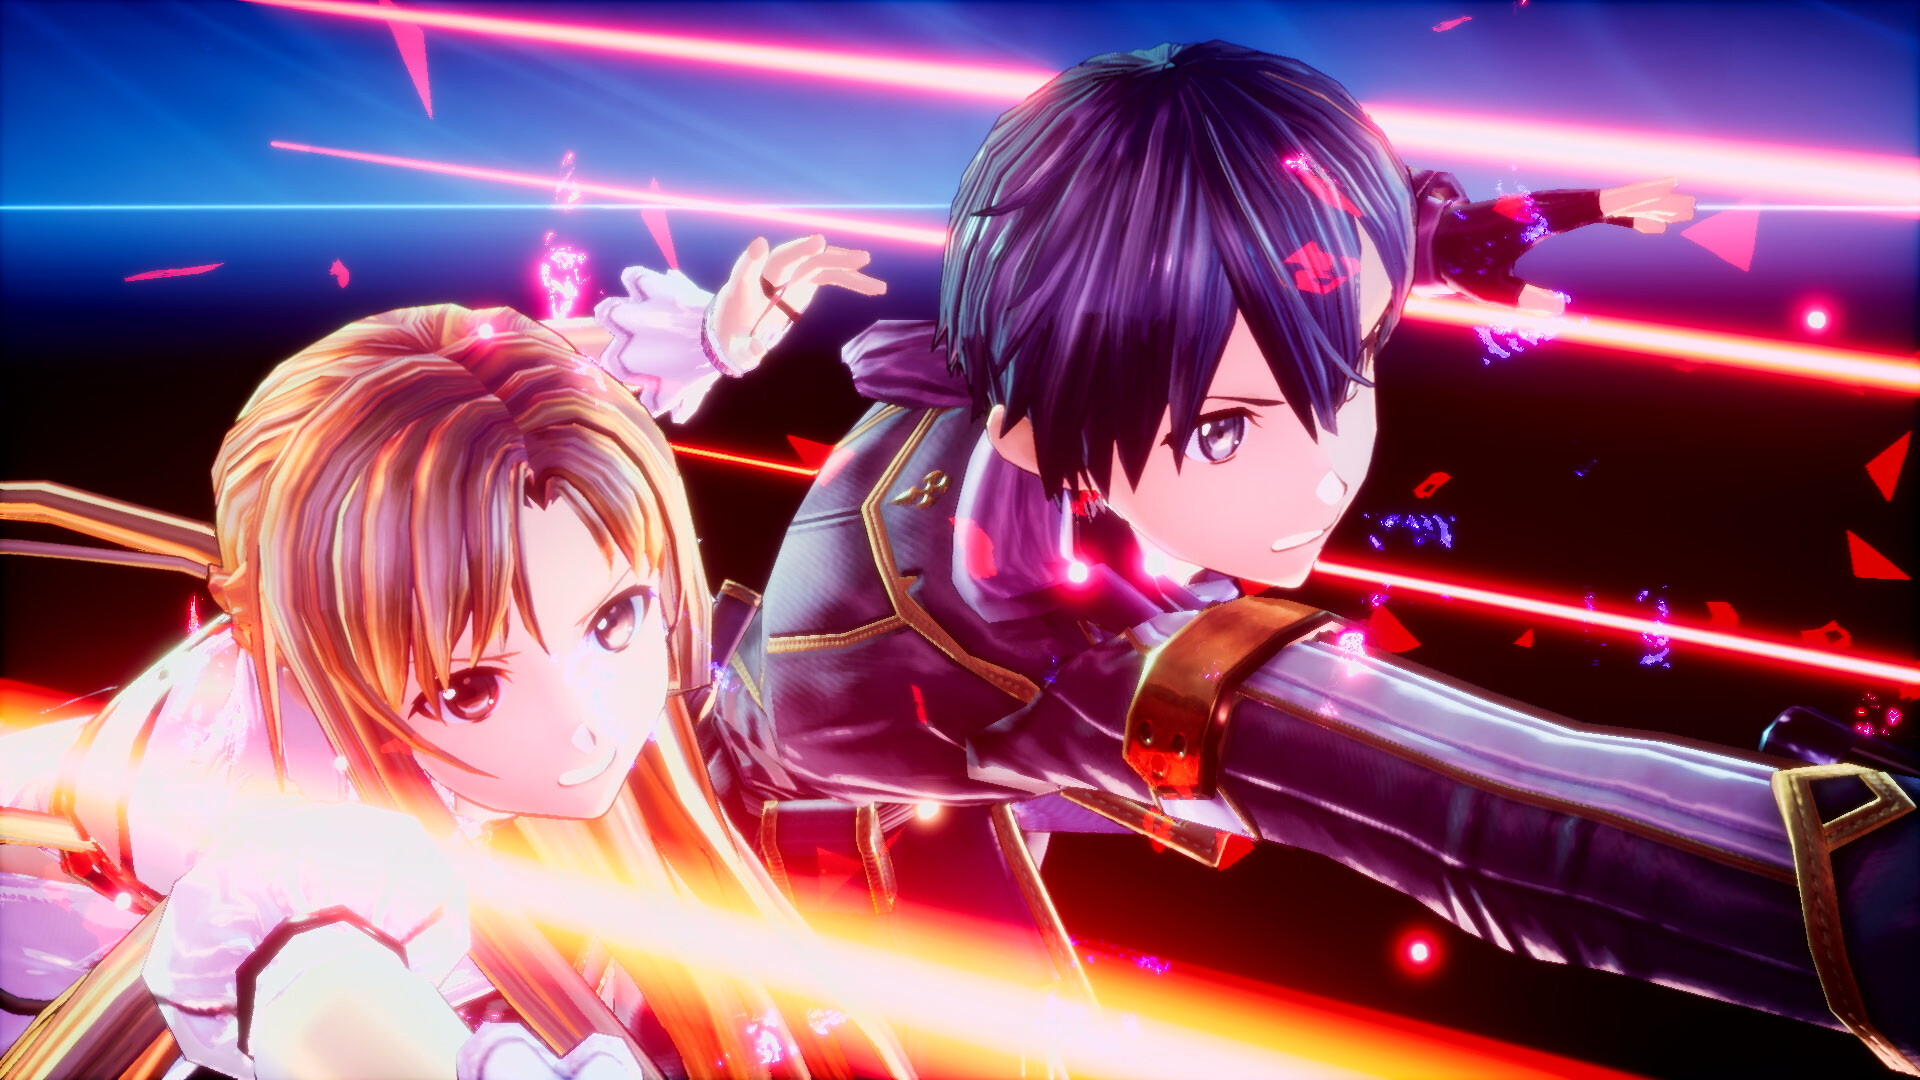 Sword Art Online: Last Recollection Action RPG Announced for 2023